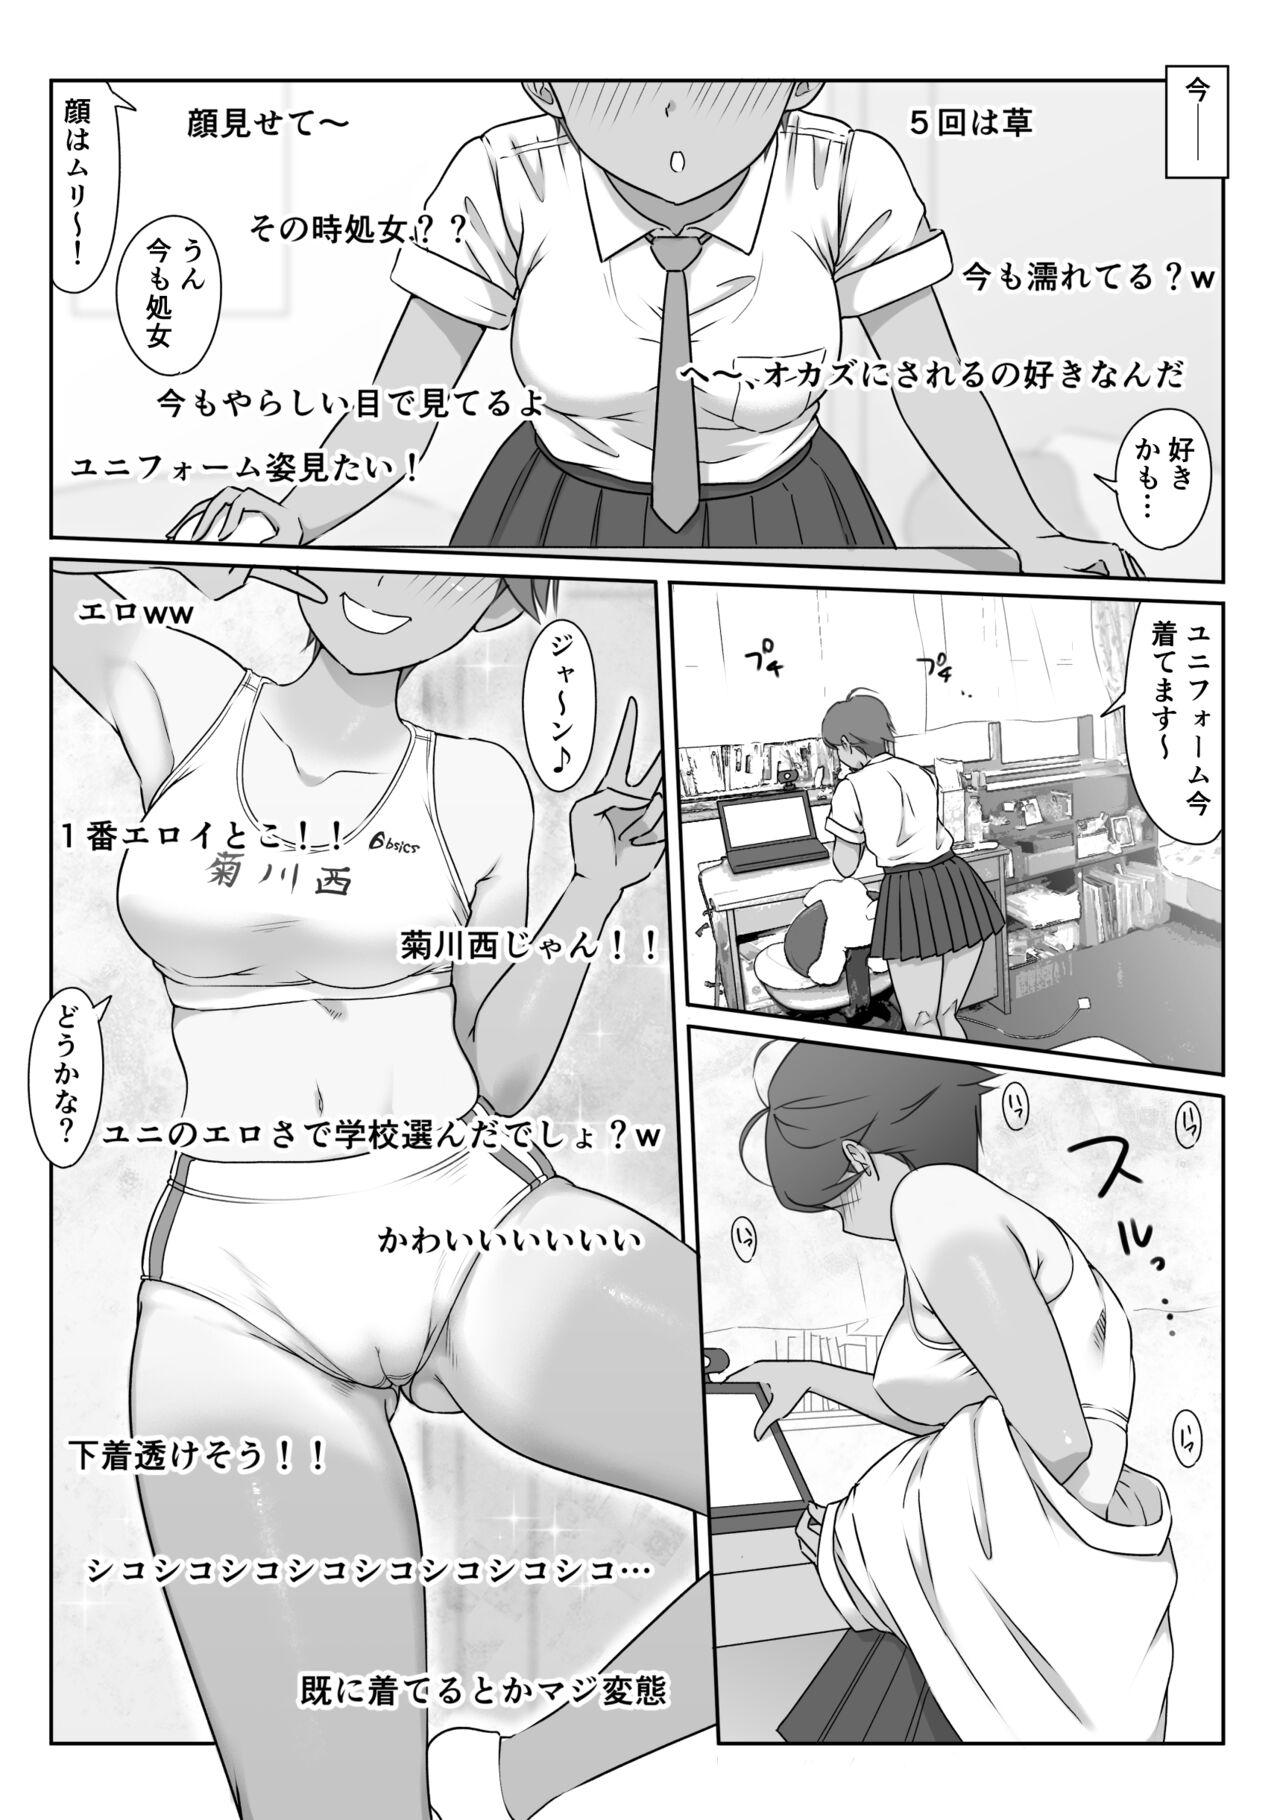 Double Penetration ボーイッシュ陸上部明音の秘密配信 Free Blowjobs - Page 7